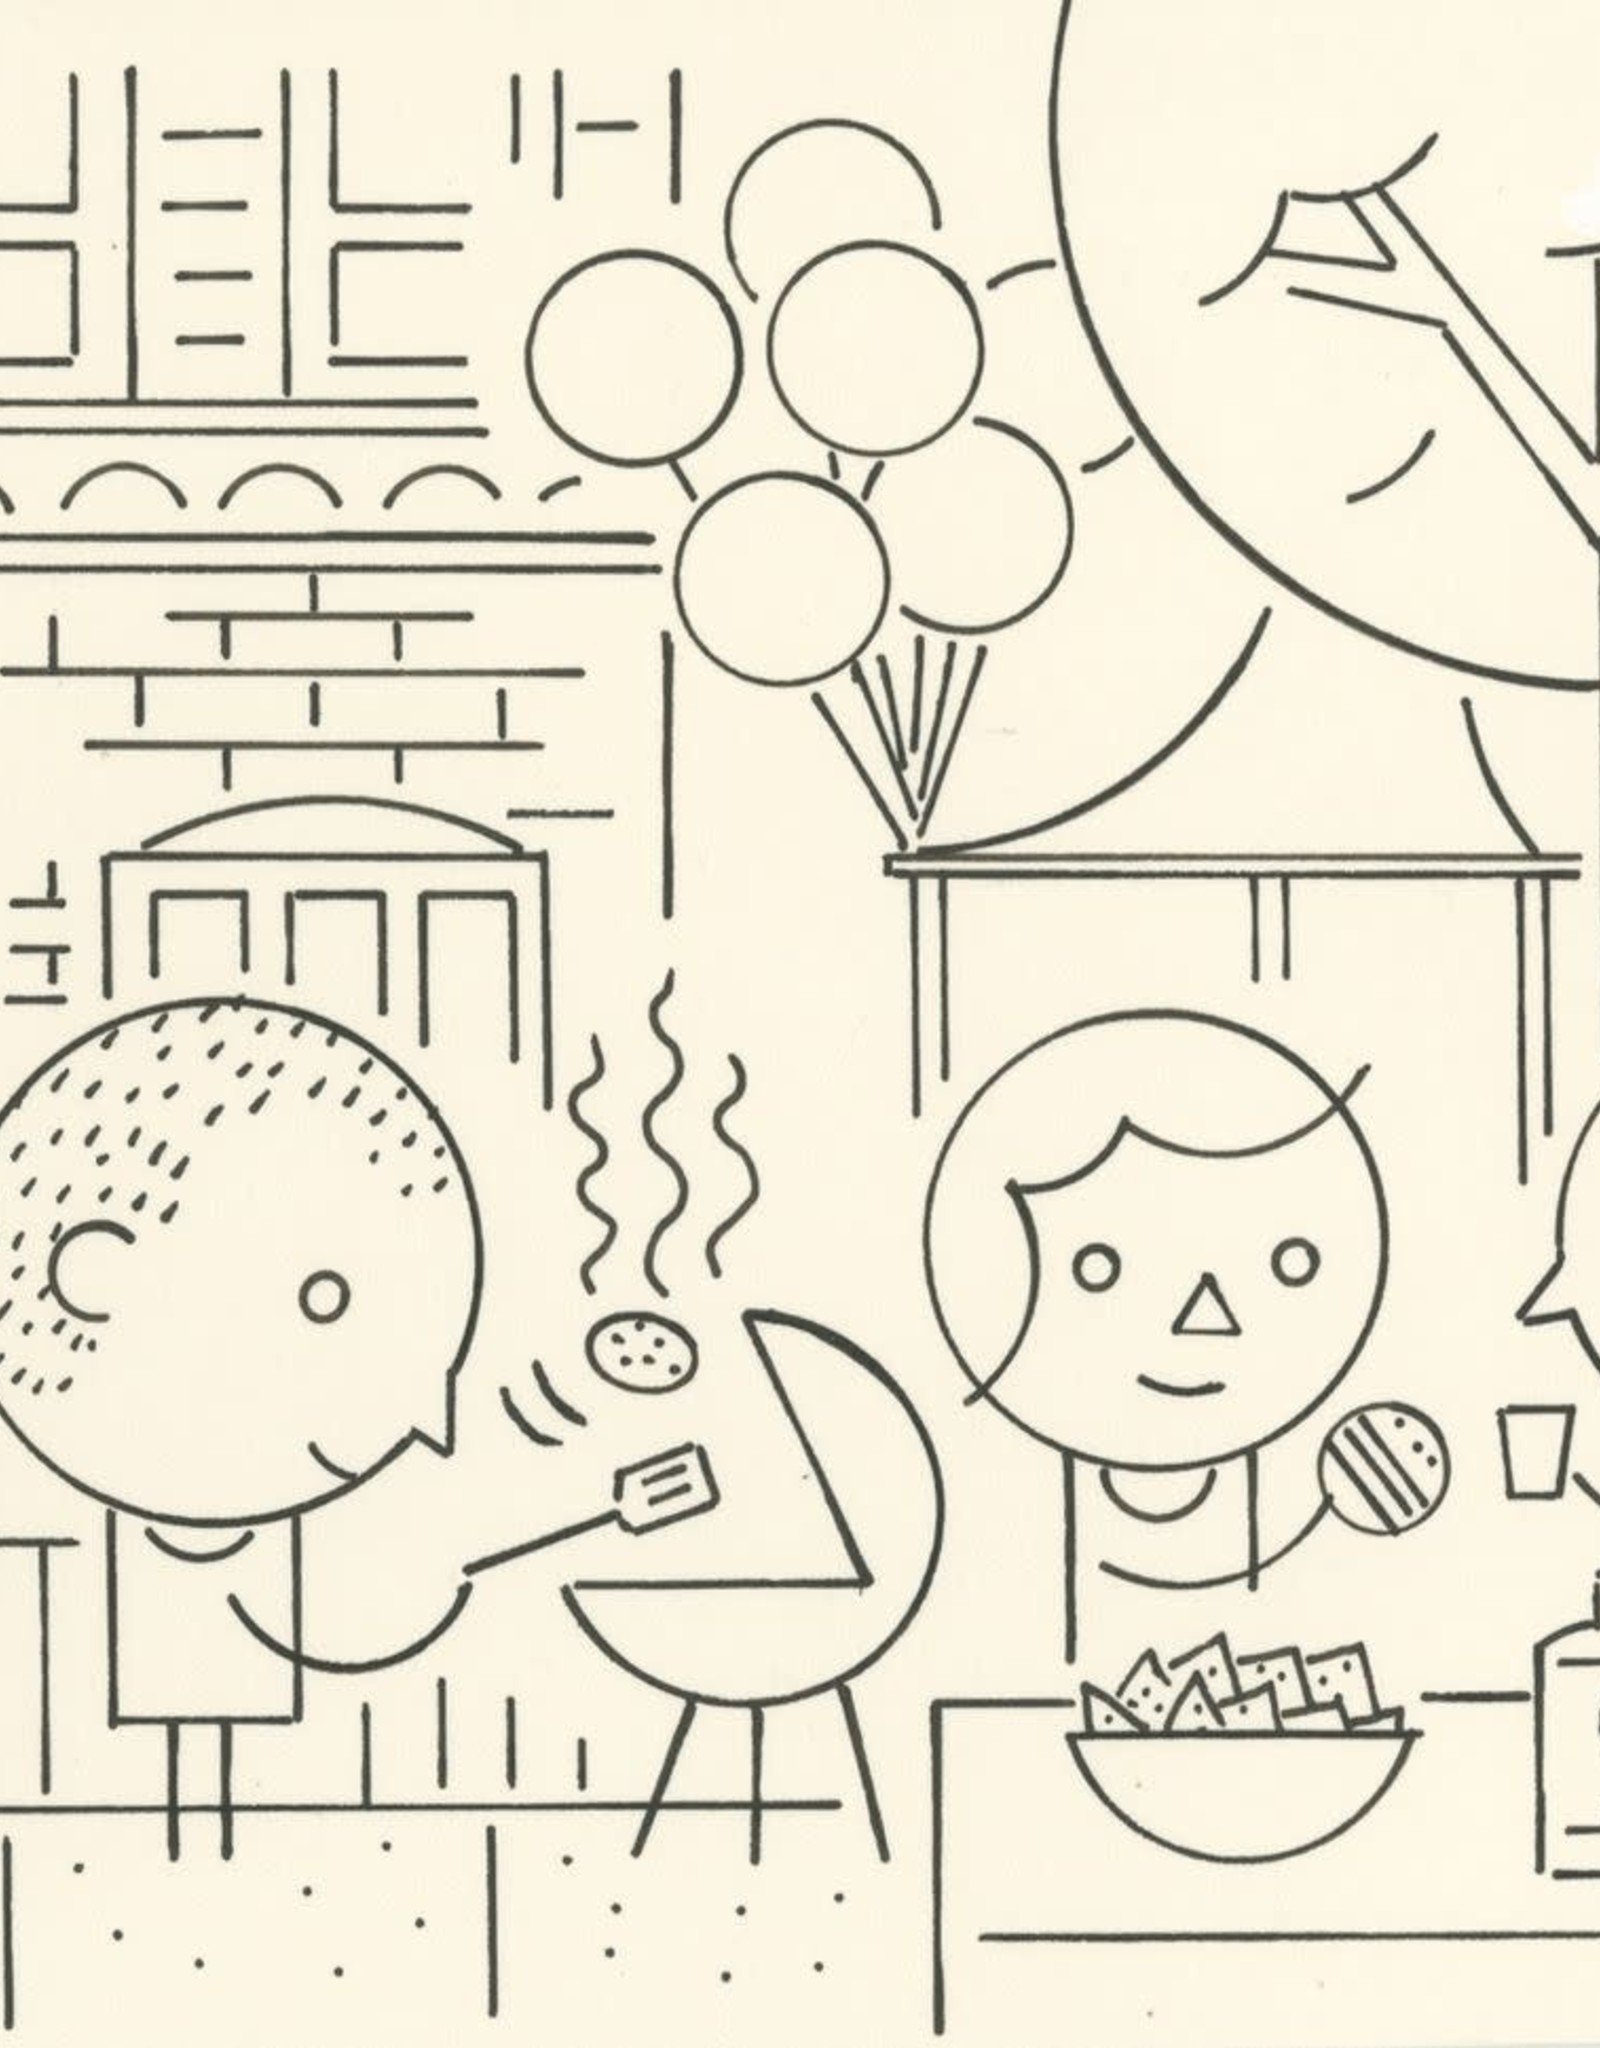 Ivan Brunetti "BBQ" Illustration by Ivan Brunetti for the New Yorker, Goings On About Town, September 12, 2013